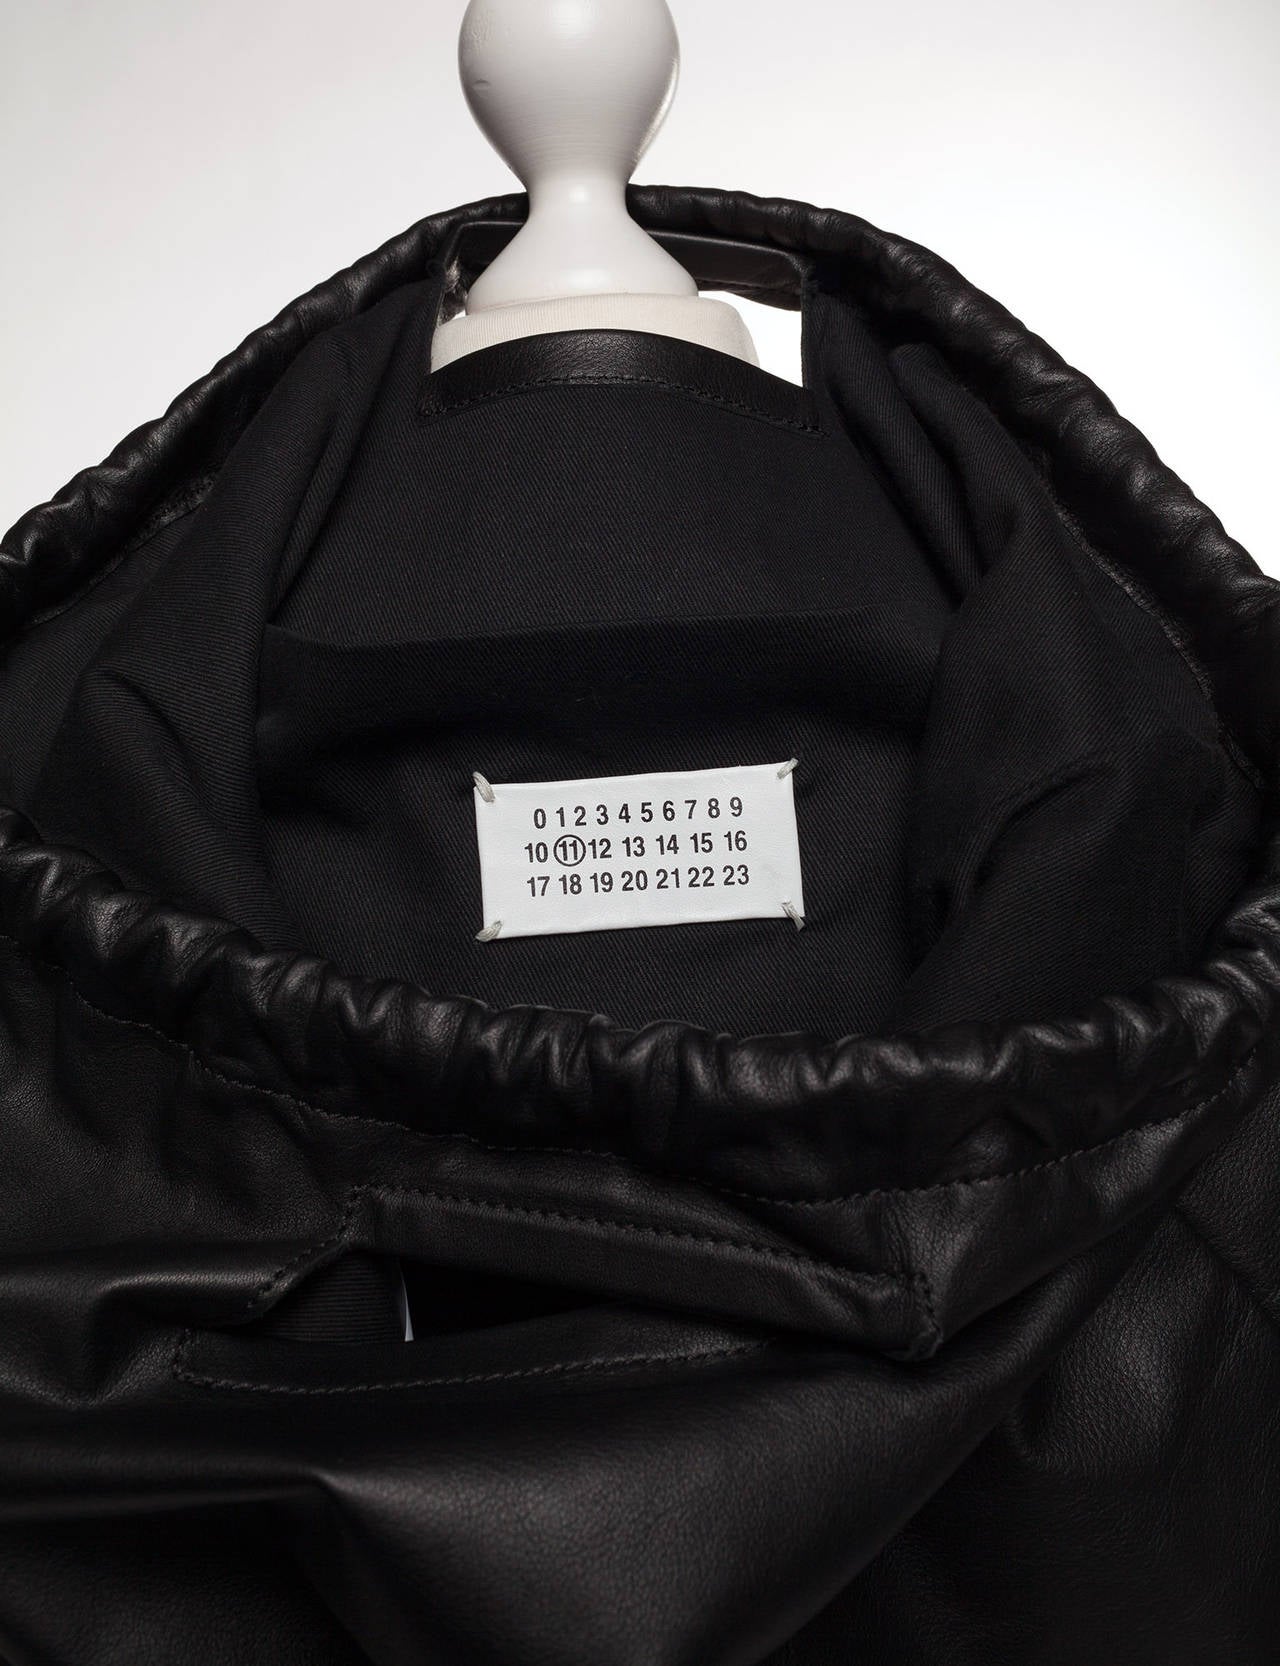 NEW Maison Martin Margiela black Backpack from SS15 'sold out' 3